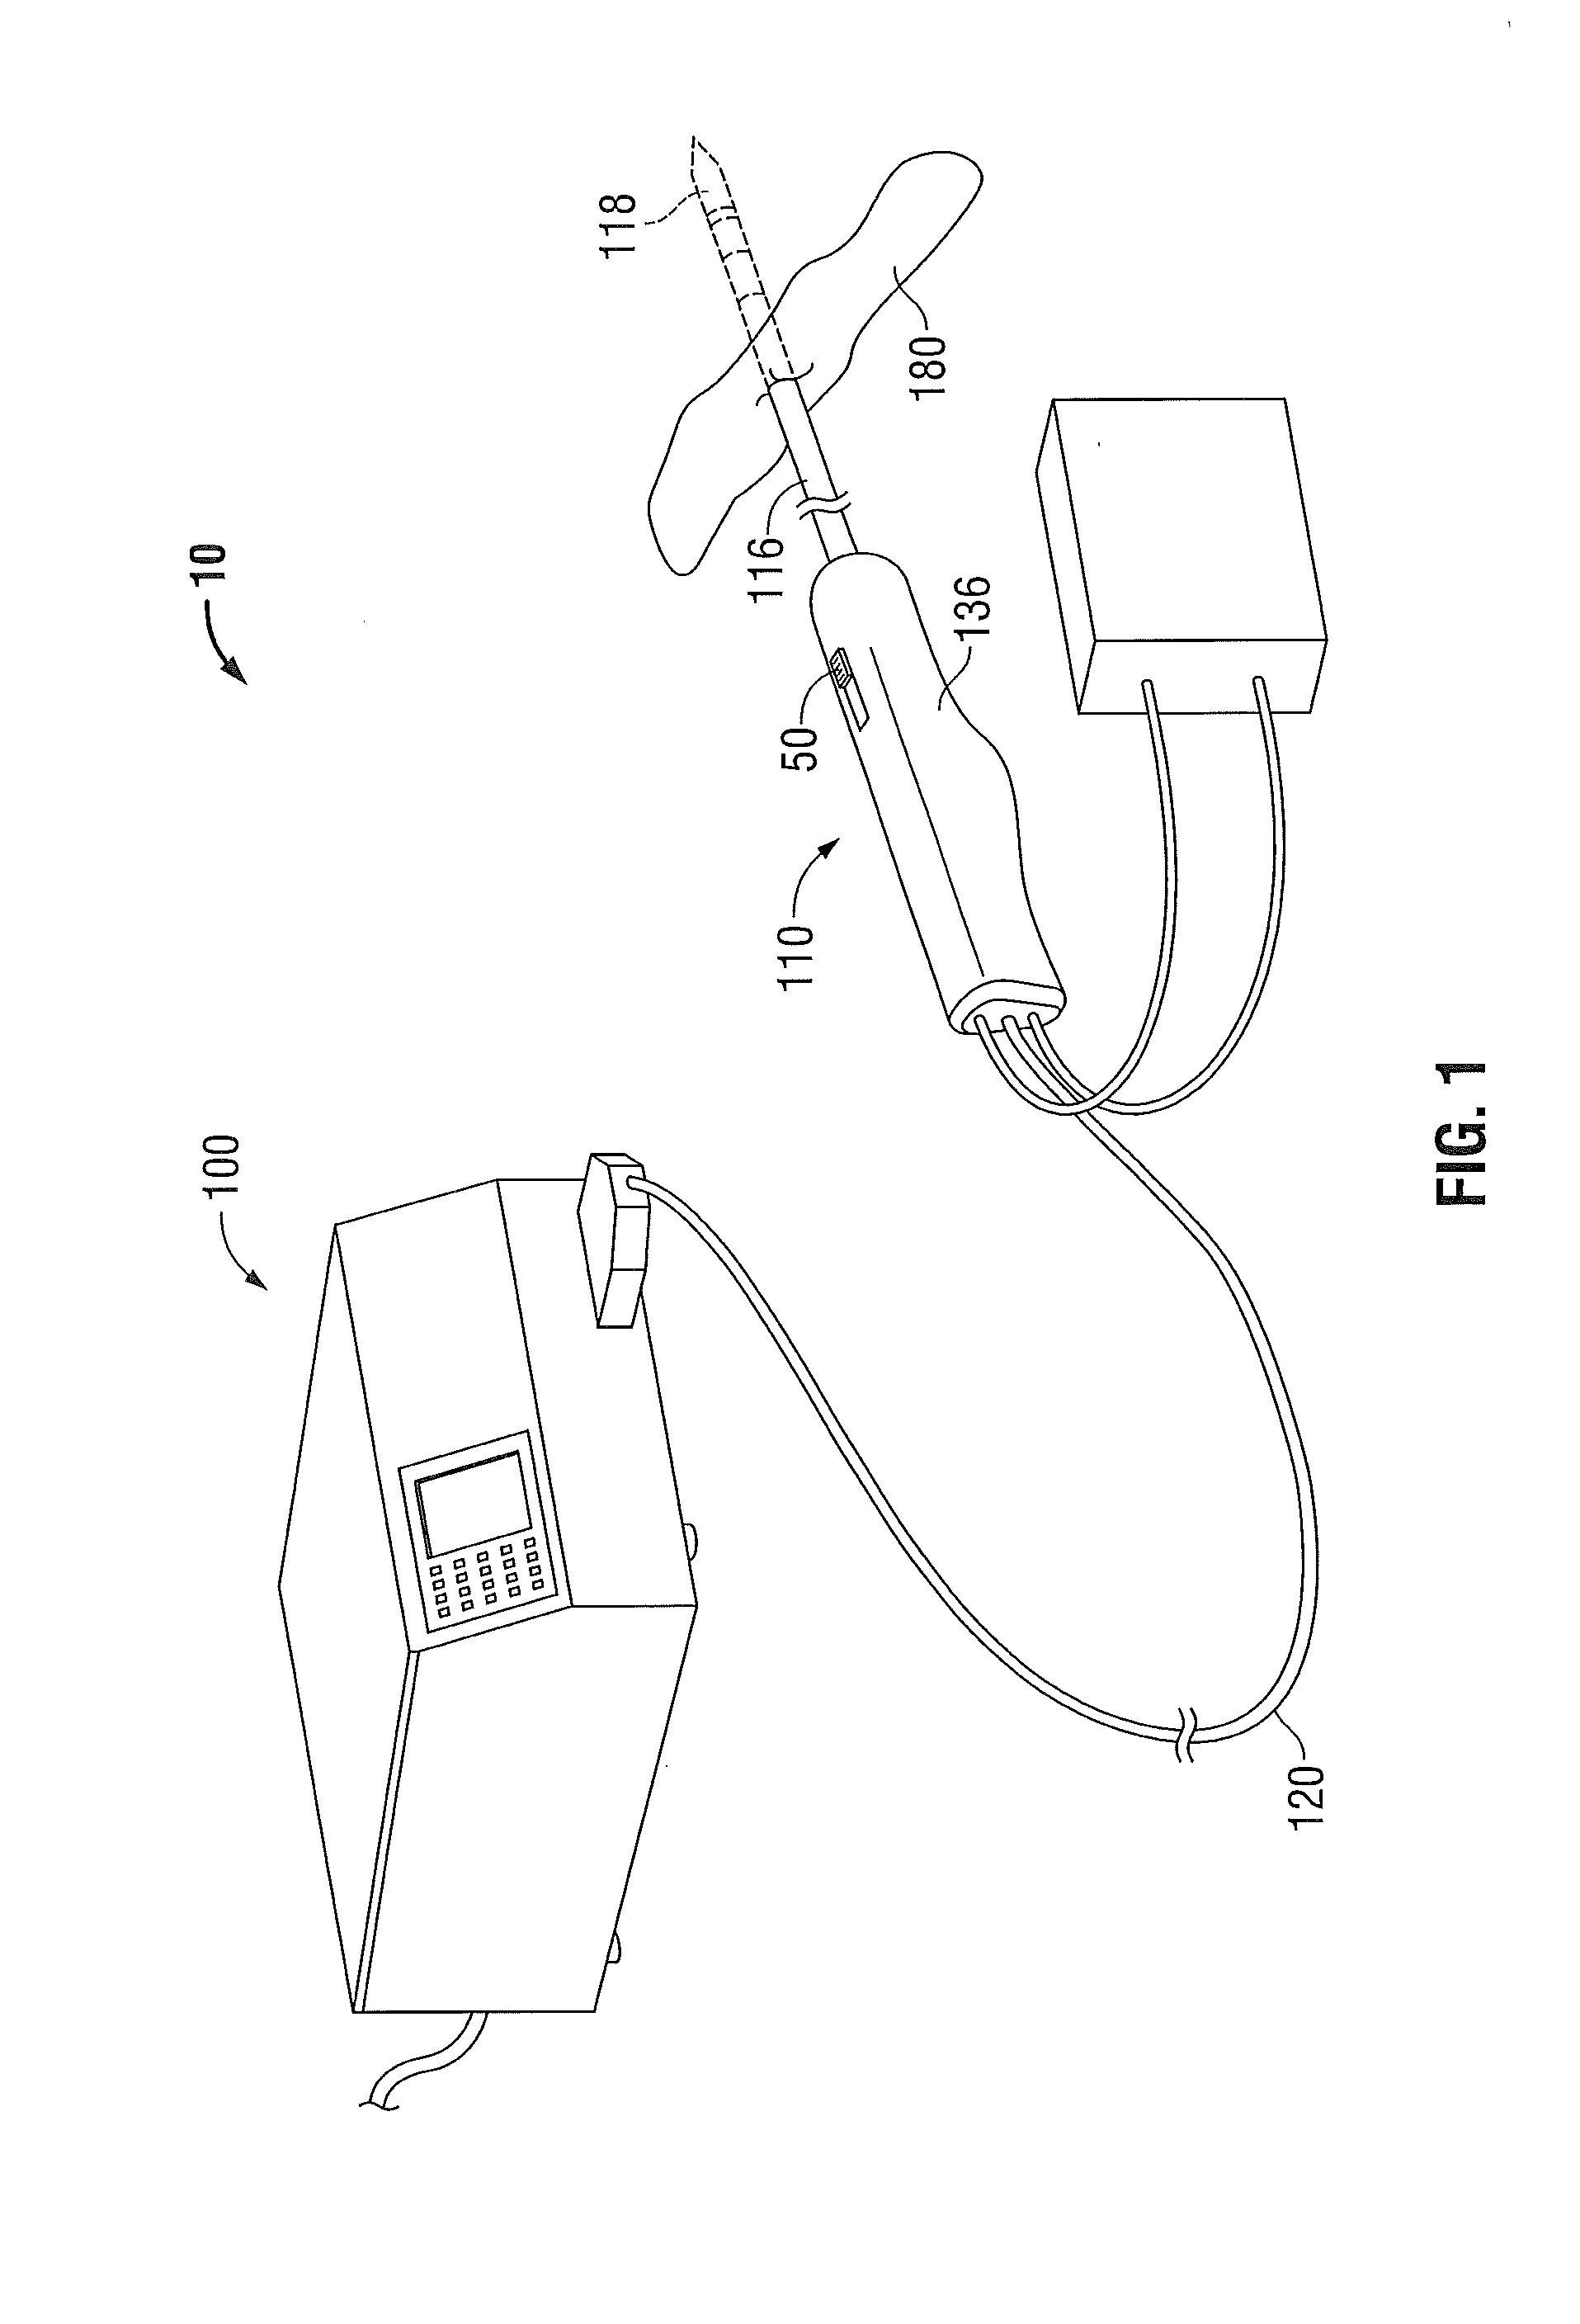 Energy-harvesting system, apparatus and methods